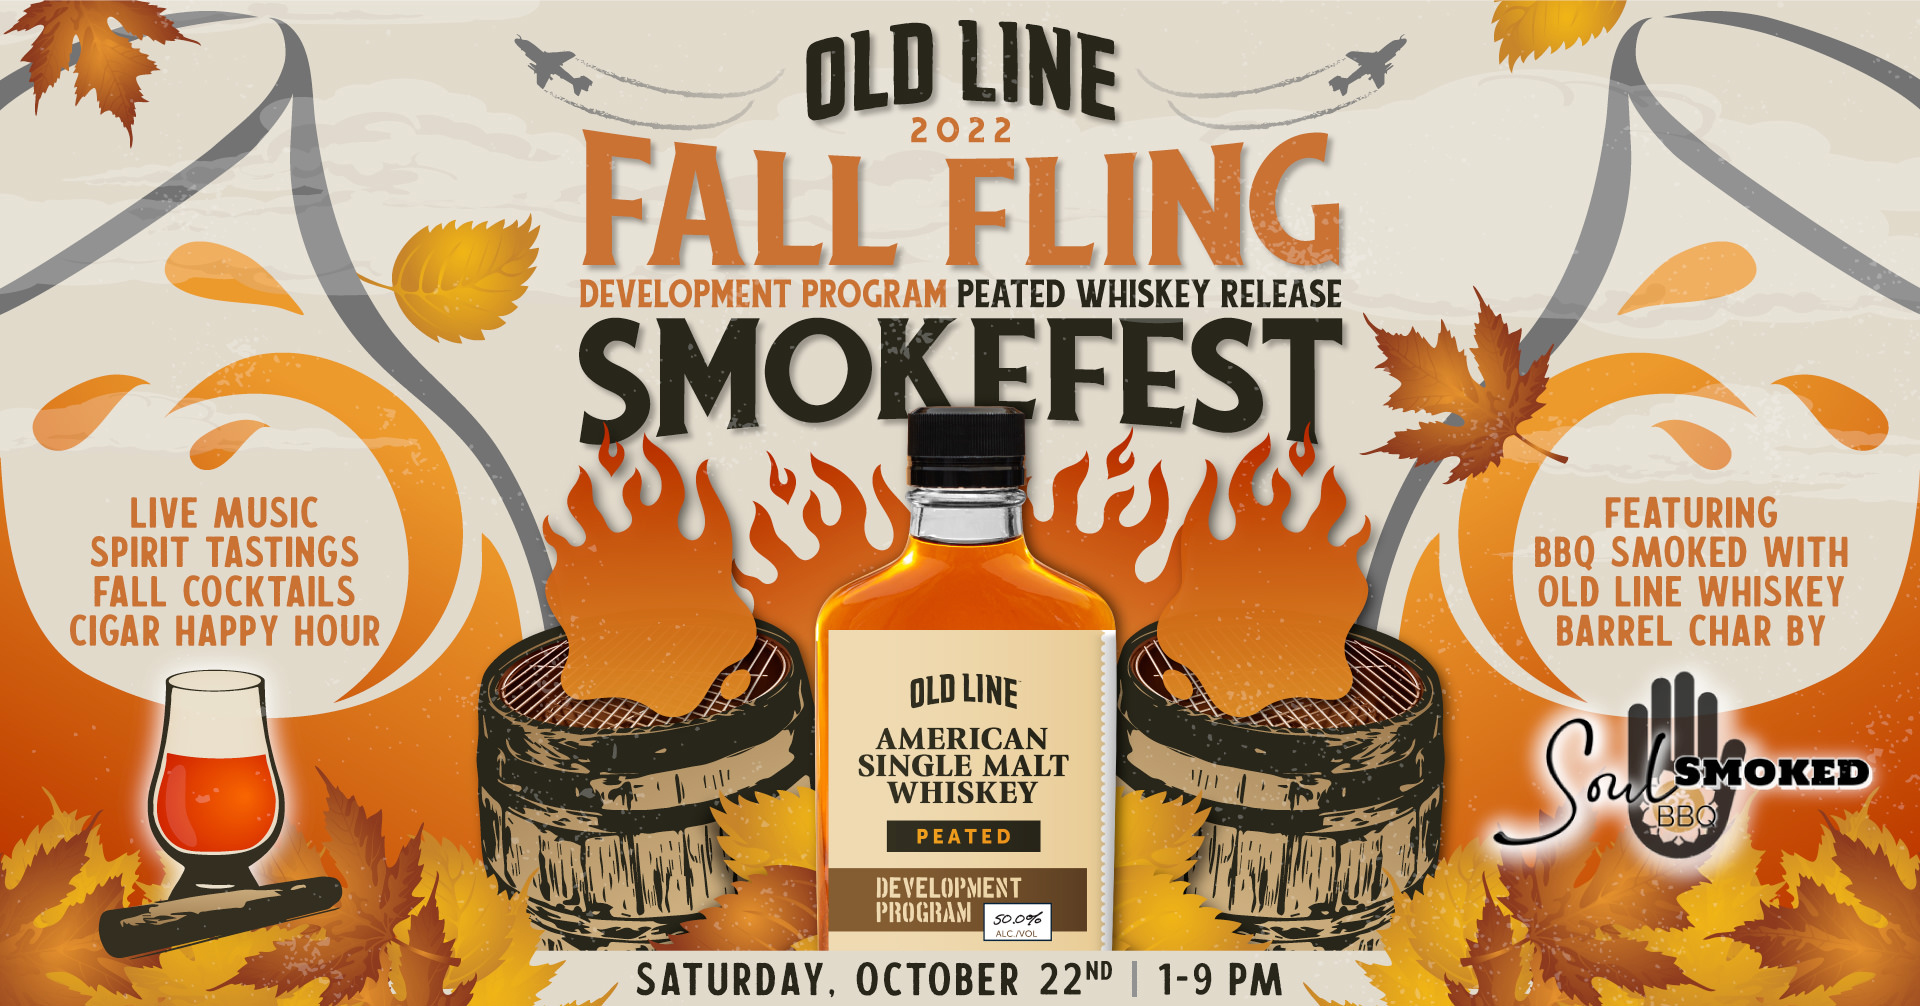 Old Line Fall Fling Facebook Event Graphic